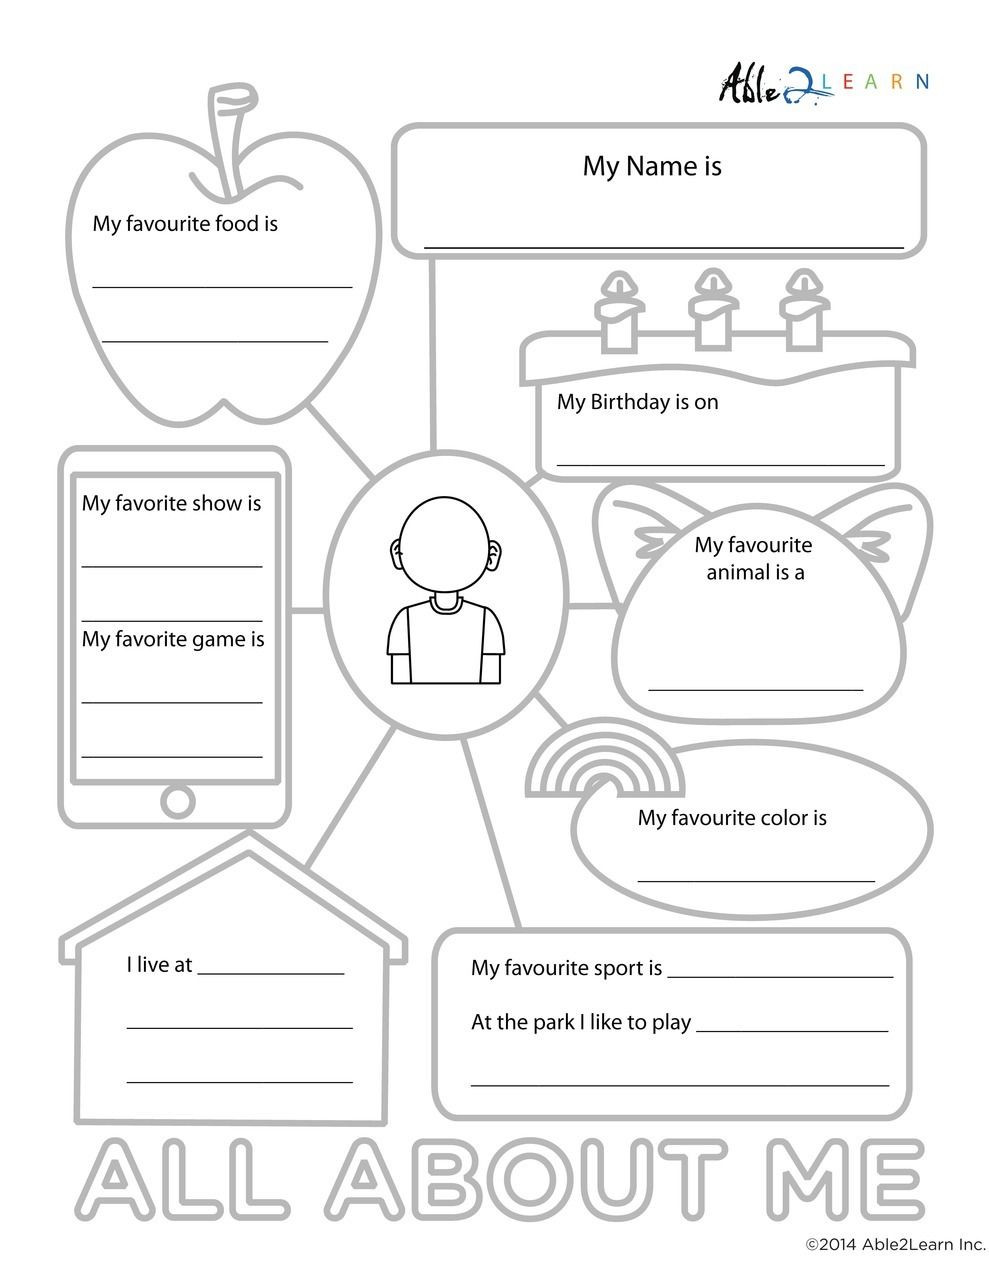 All About Me Printable Worksheet All About Me Printable Worksheets Free Teaching Resources